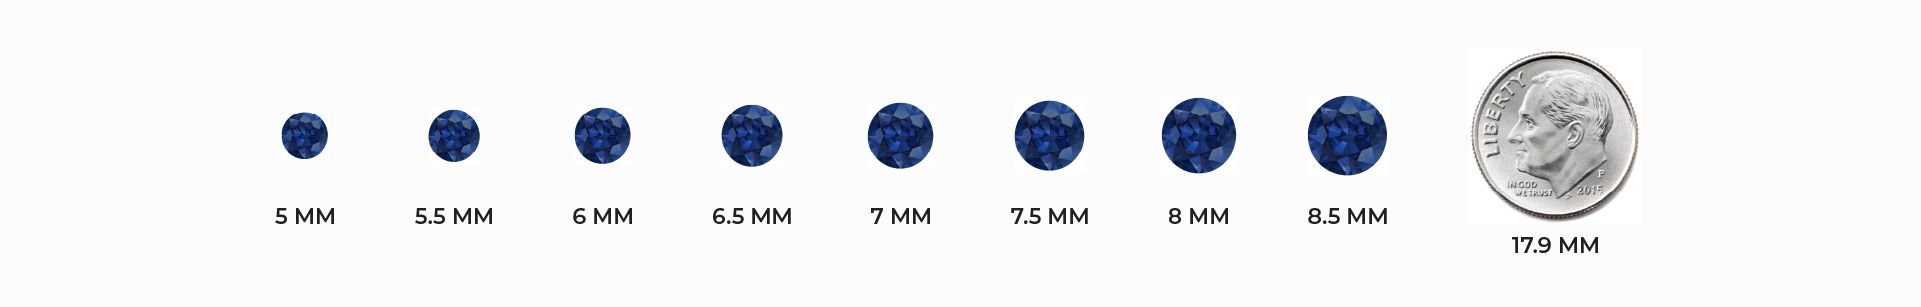 A range of sapphire sizes compared to a dime